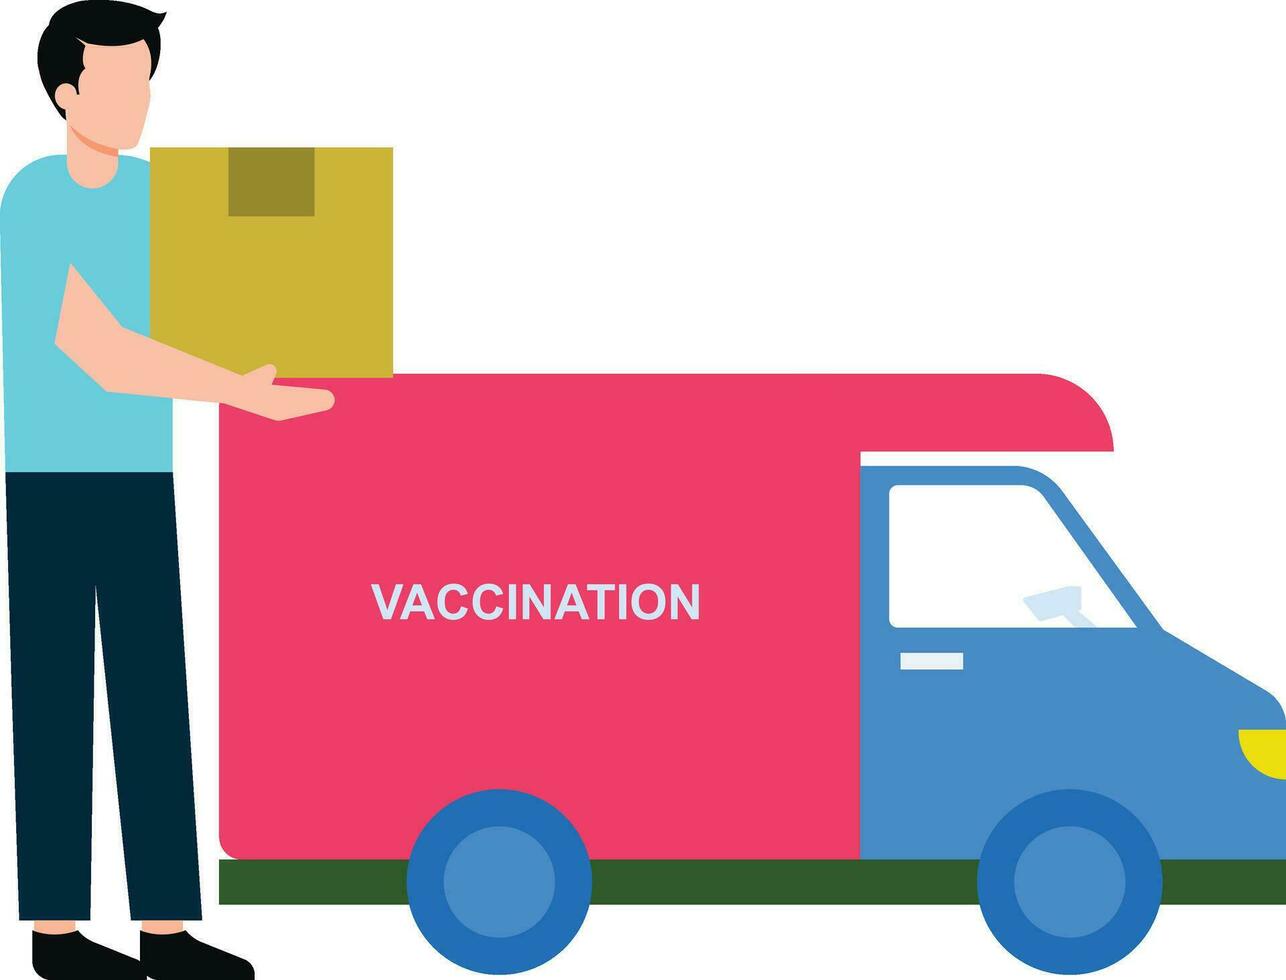 A boy wearing a mask stands holding a vaccination box. vector